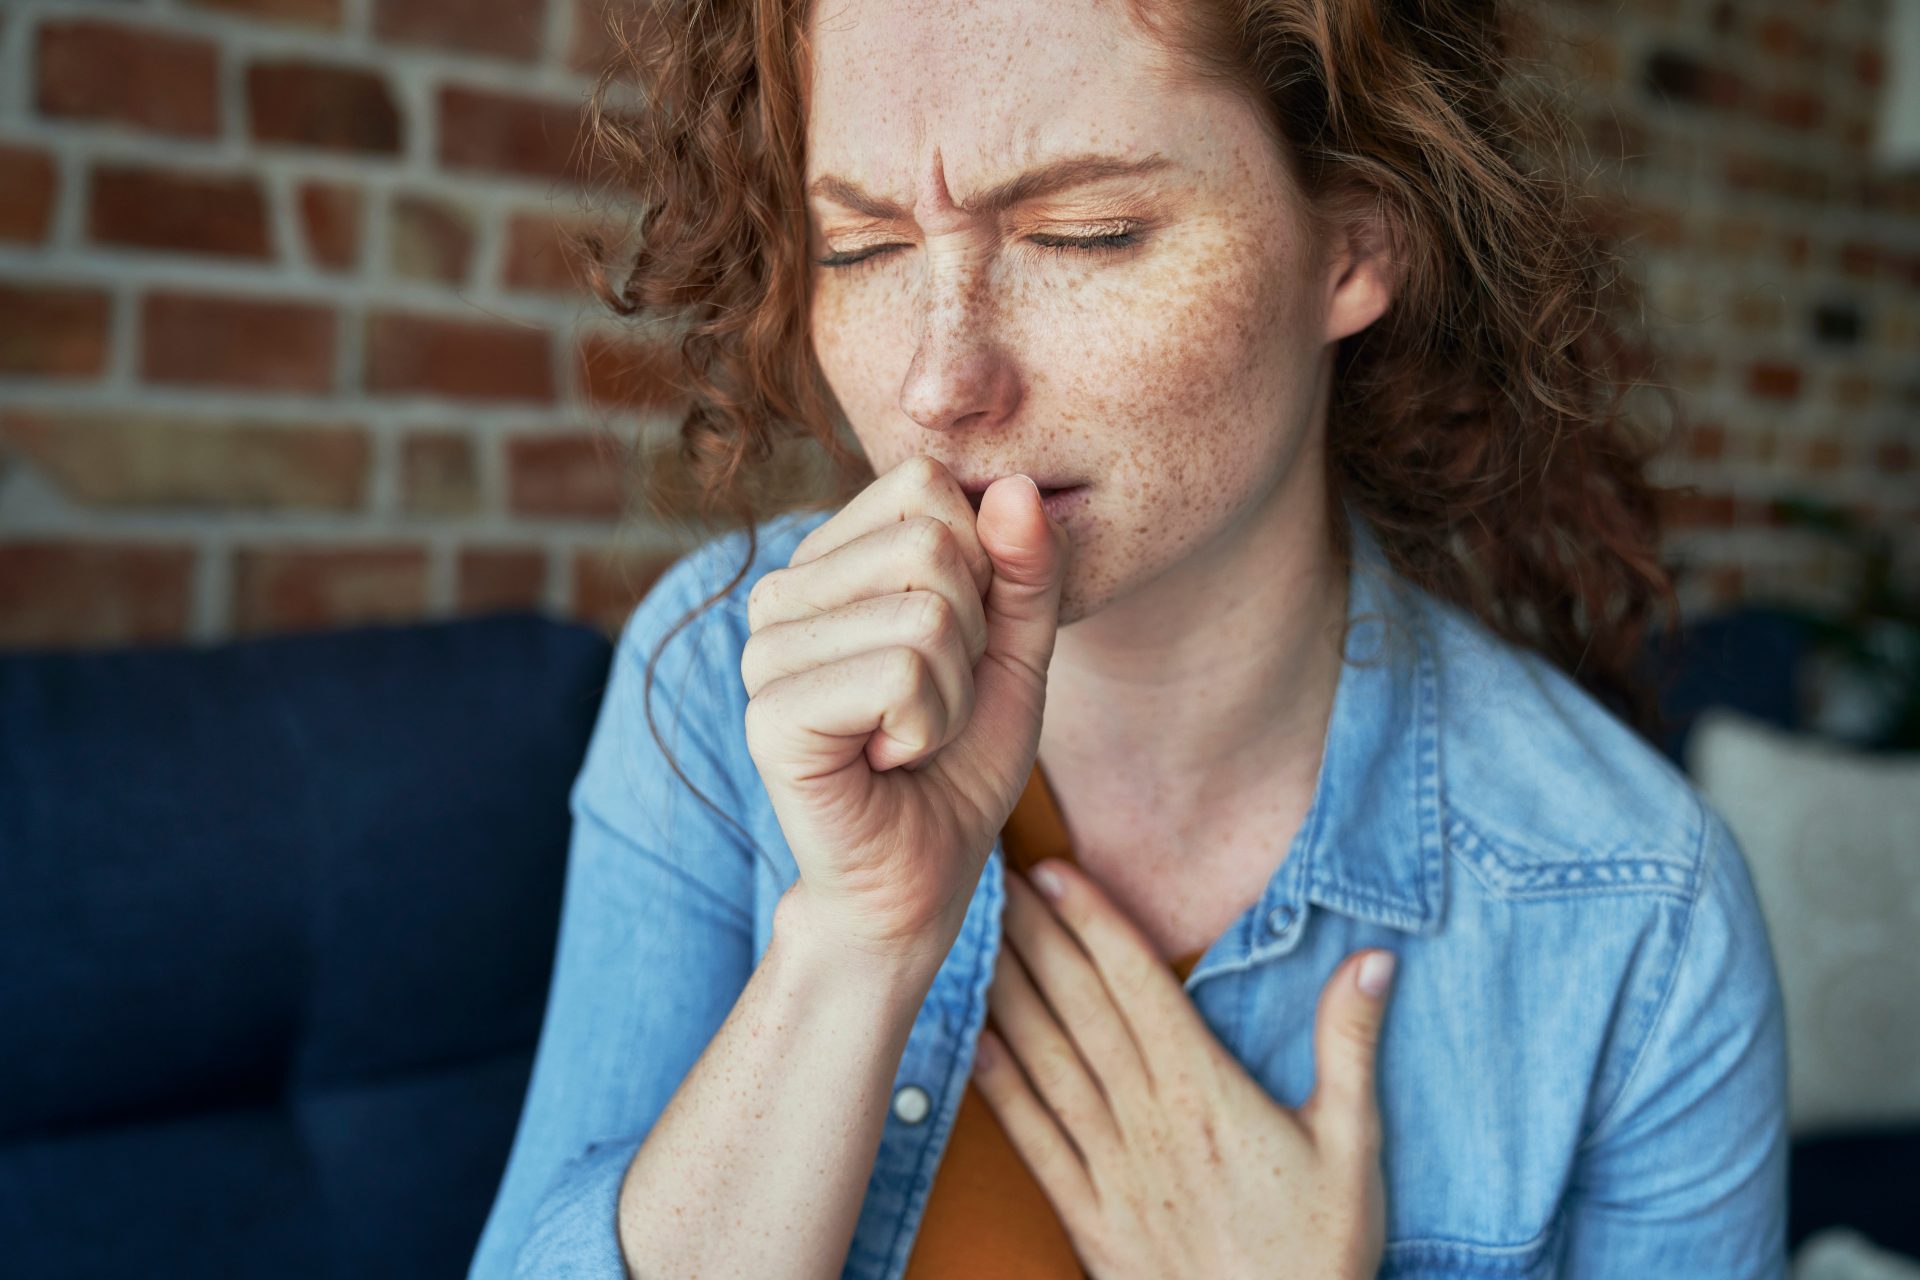 Cough without a cold: 3 possible causes